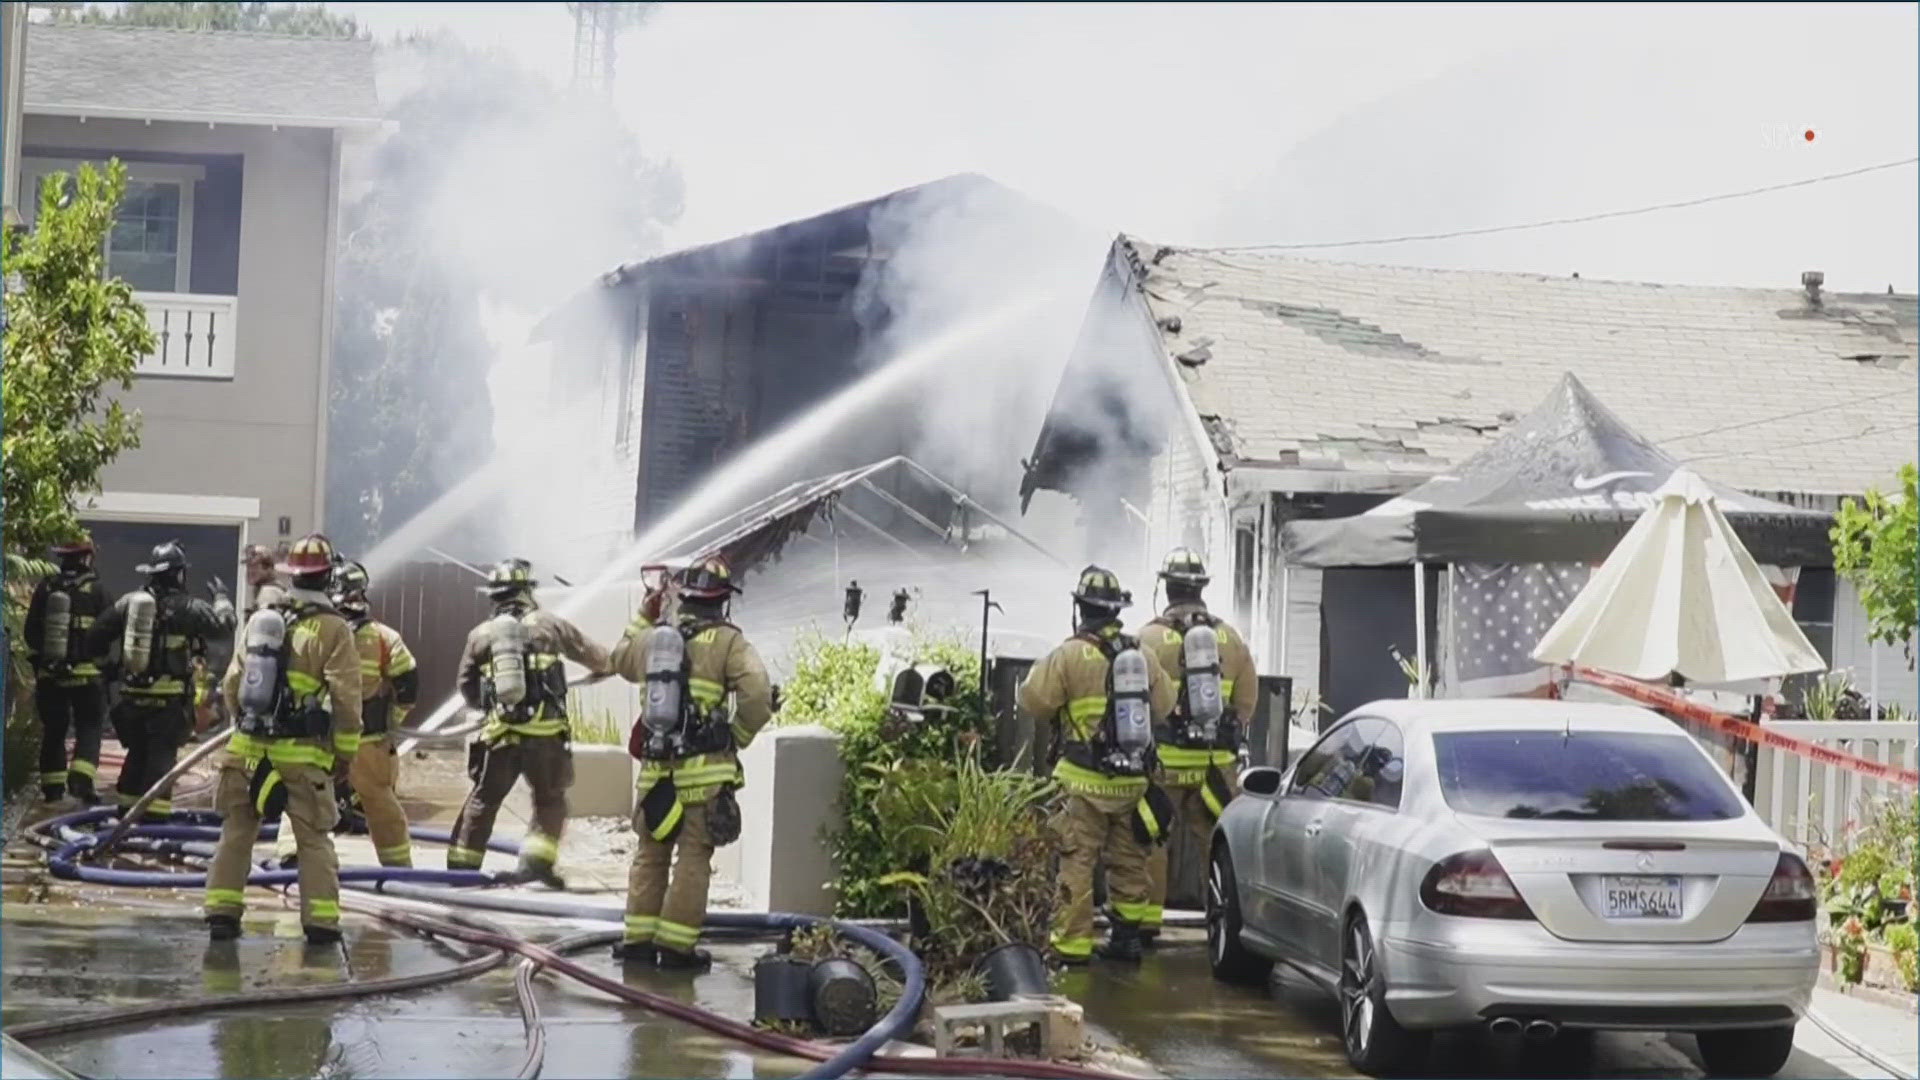 Fire fighters responded to the call just before 2 p.m. Saturday on Pine Avenue.